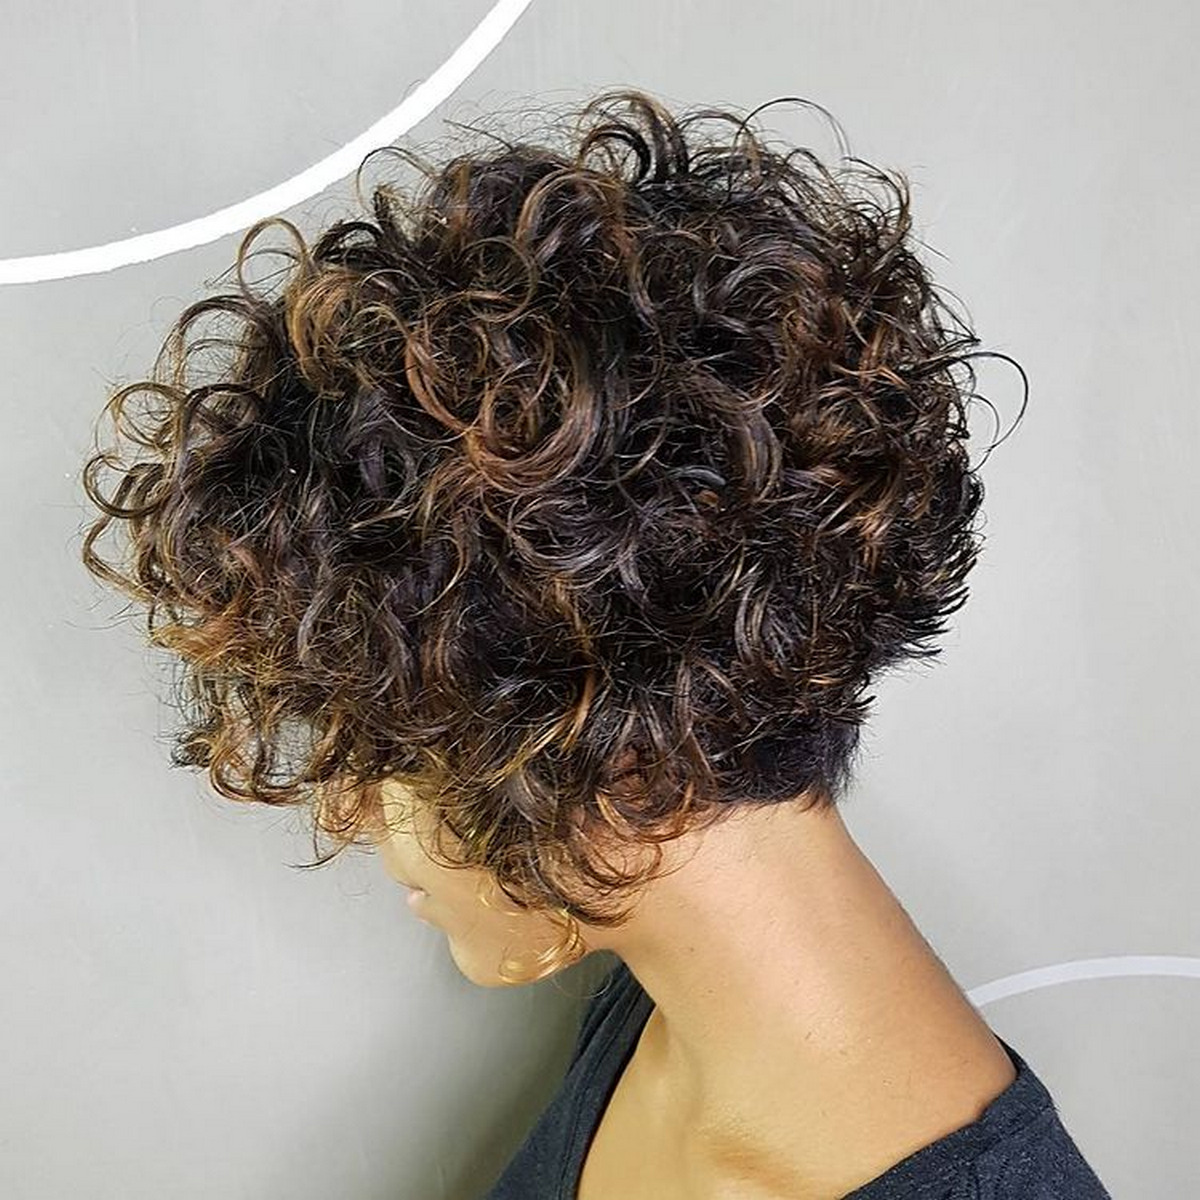 Short-Stacked Bob With Voluminous Curls